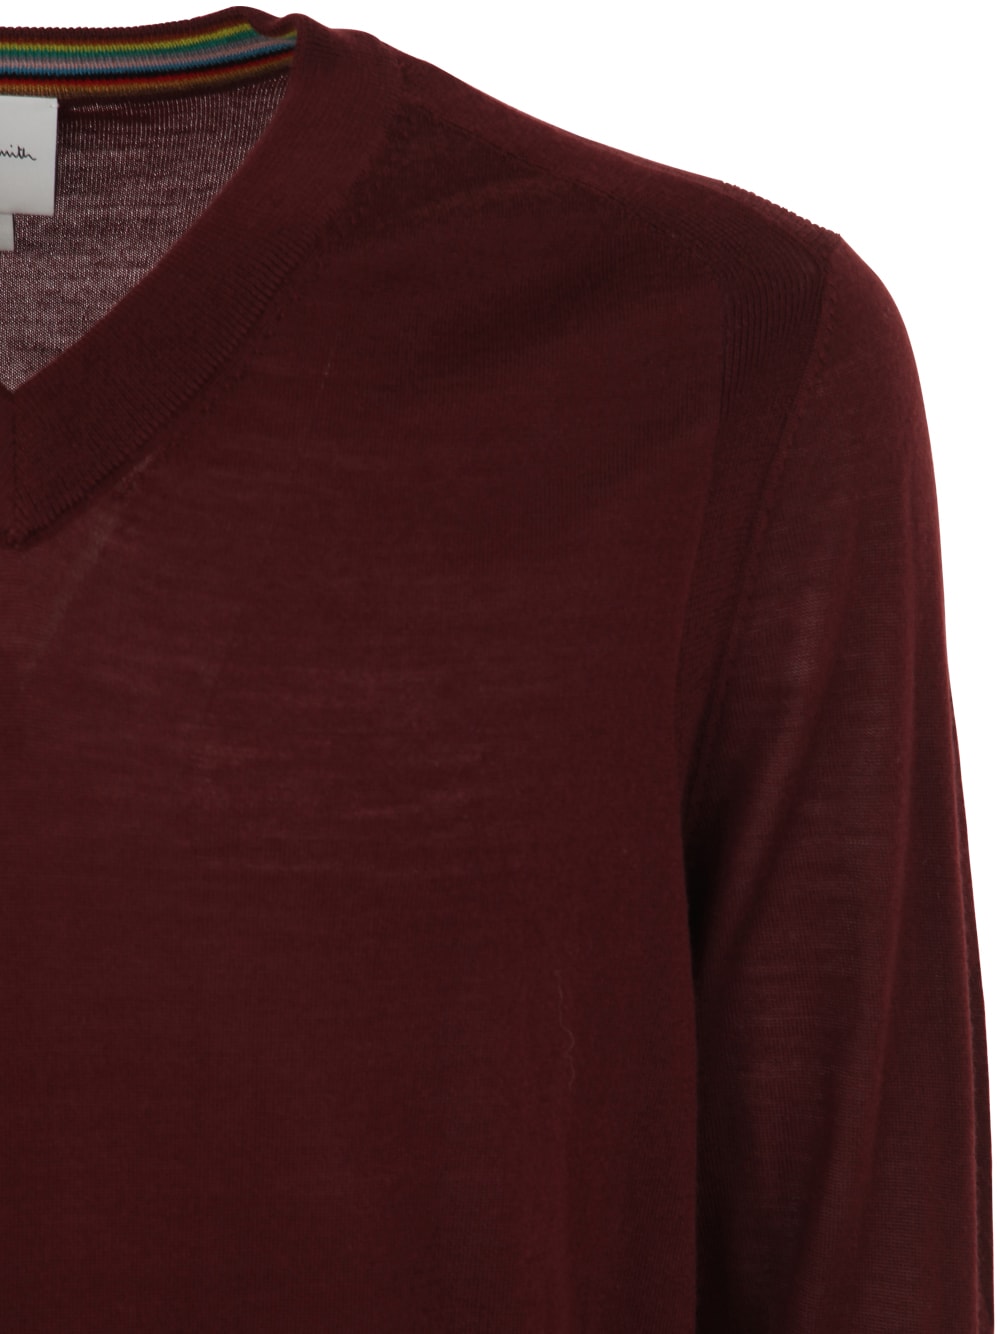 Shop Paul Smith Mens Sweater V Neck In Reds